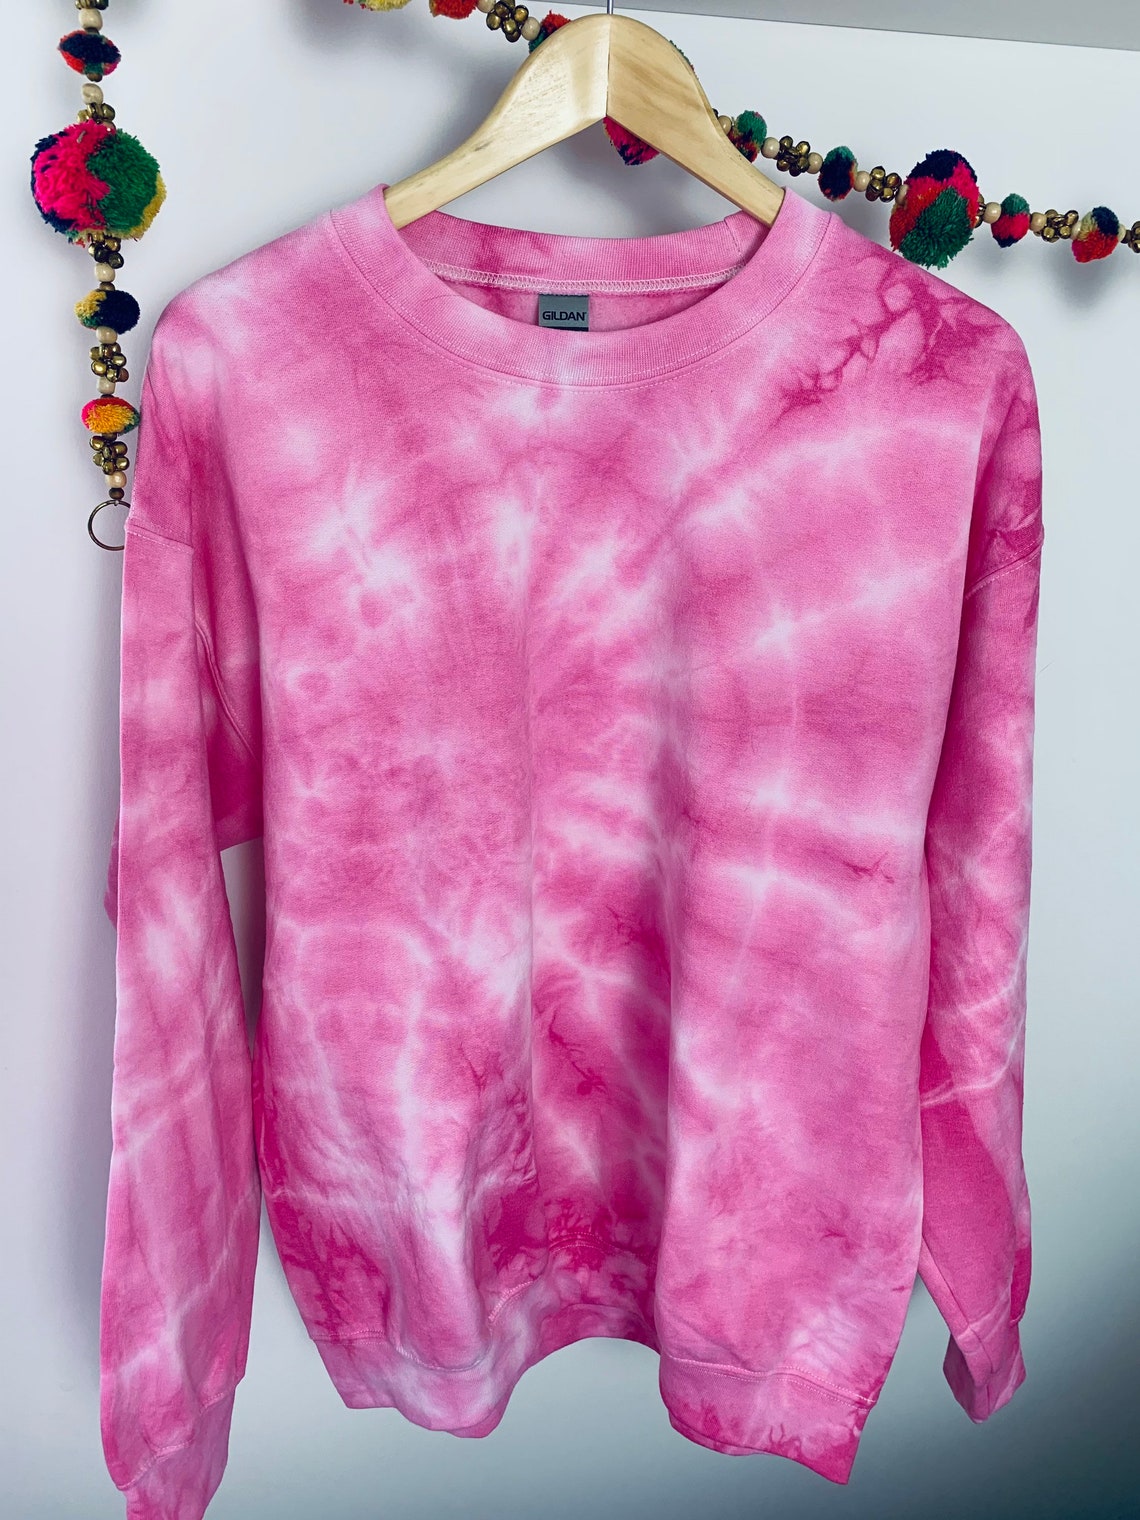 Bright Pink Tie Dyed Long Sleeved Sweatshirt Relaxed Fit Crewneck boho ...